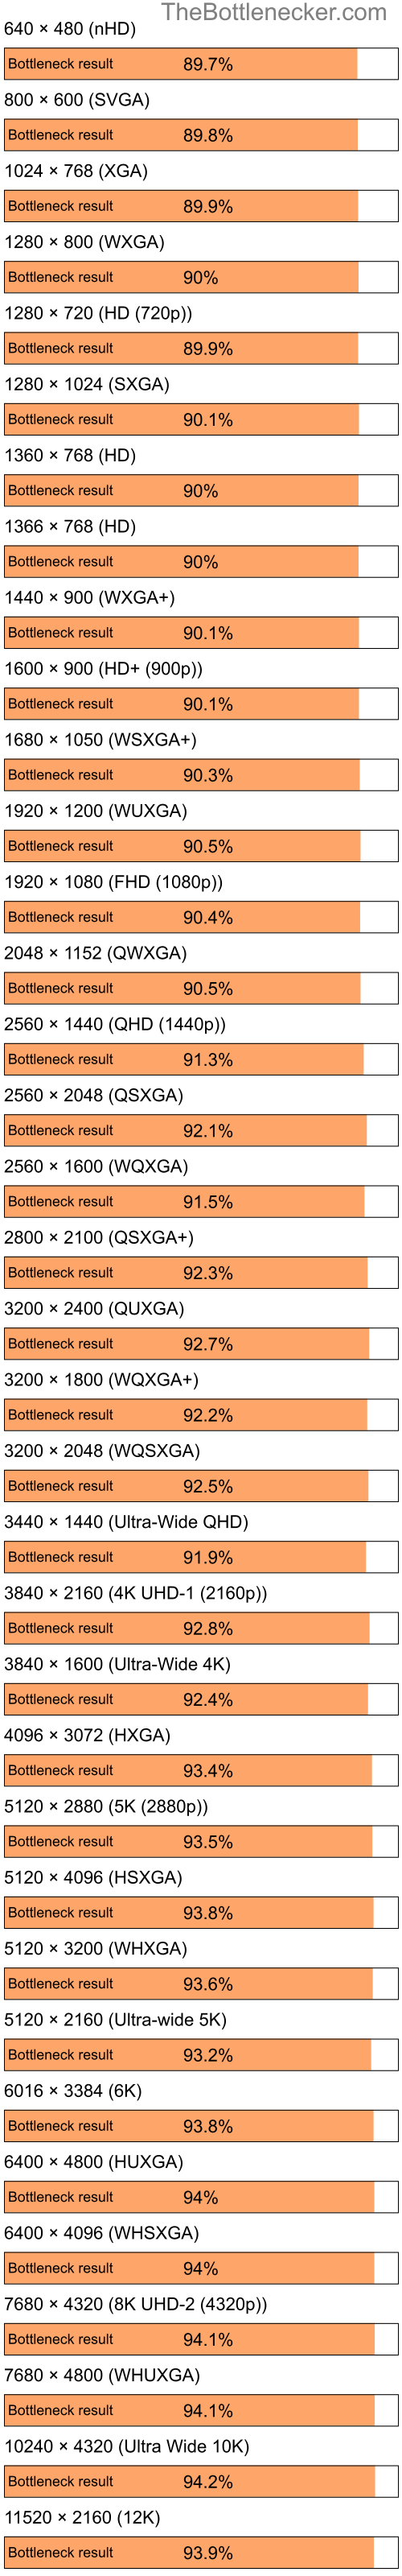 Bottleneck results by resolution for Intel Celeron and NVIDIA GeForce FX 5200 in Graphic Card Intense Tasks